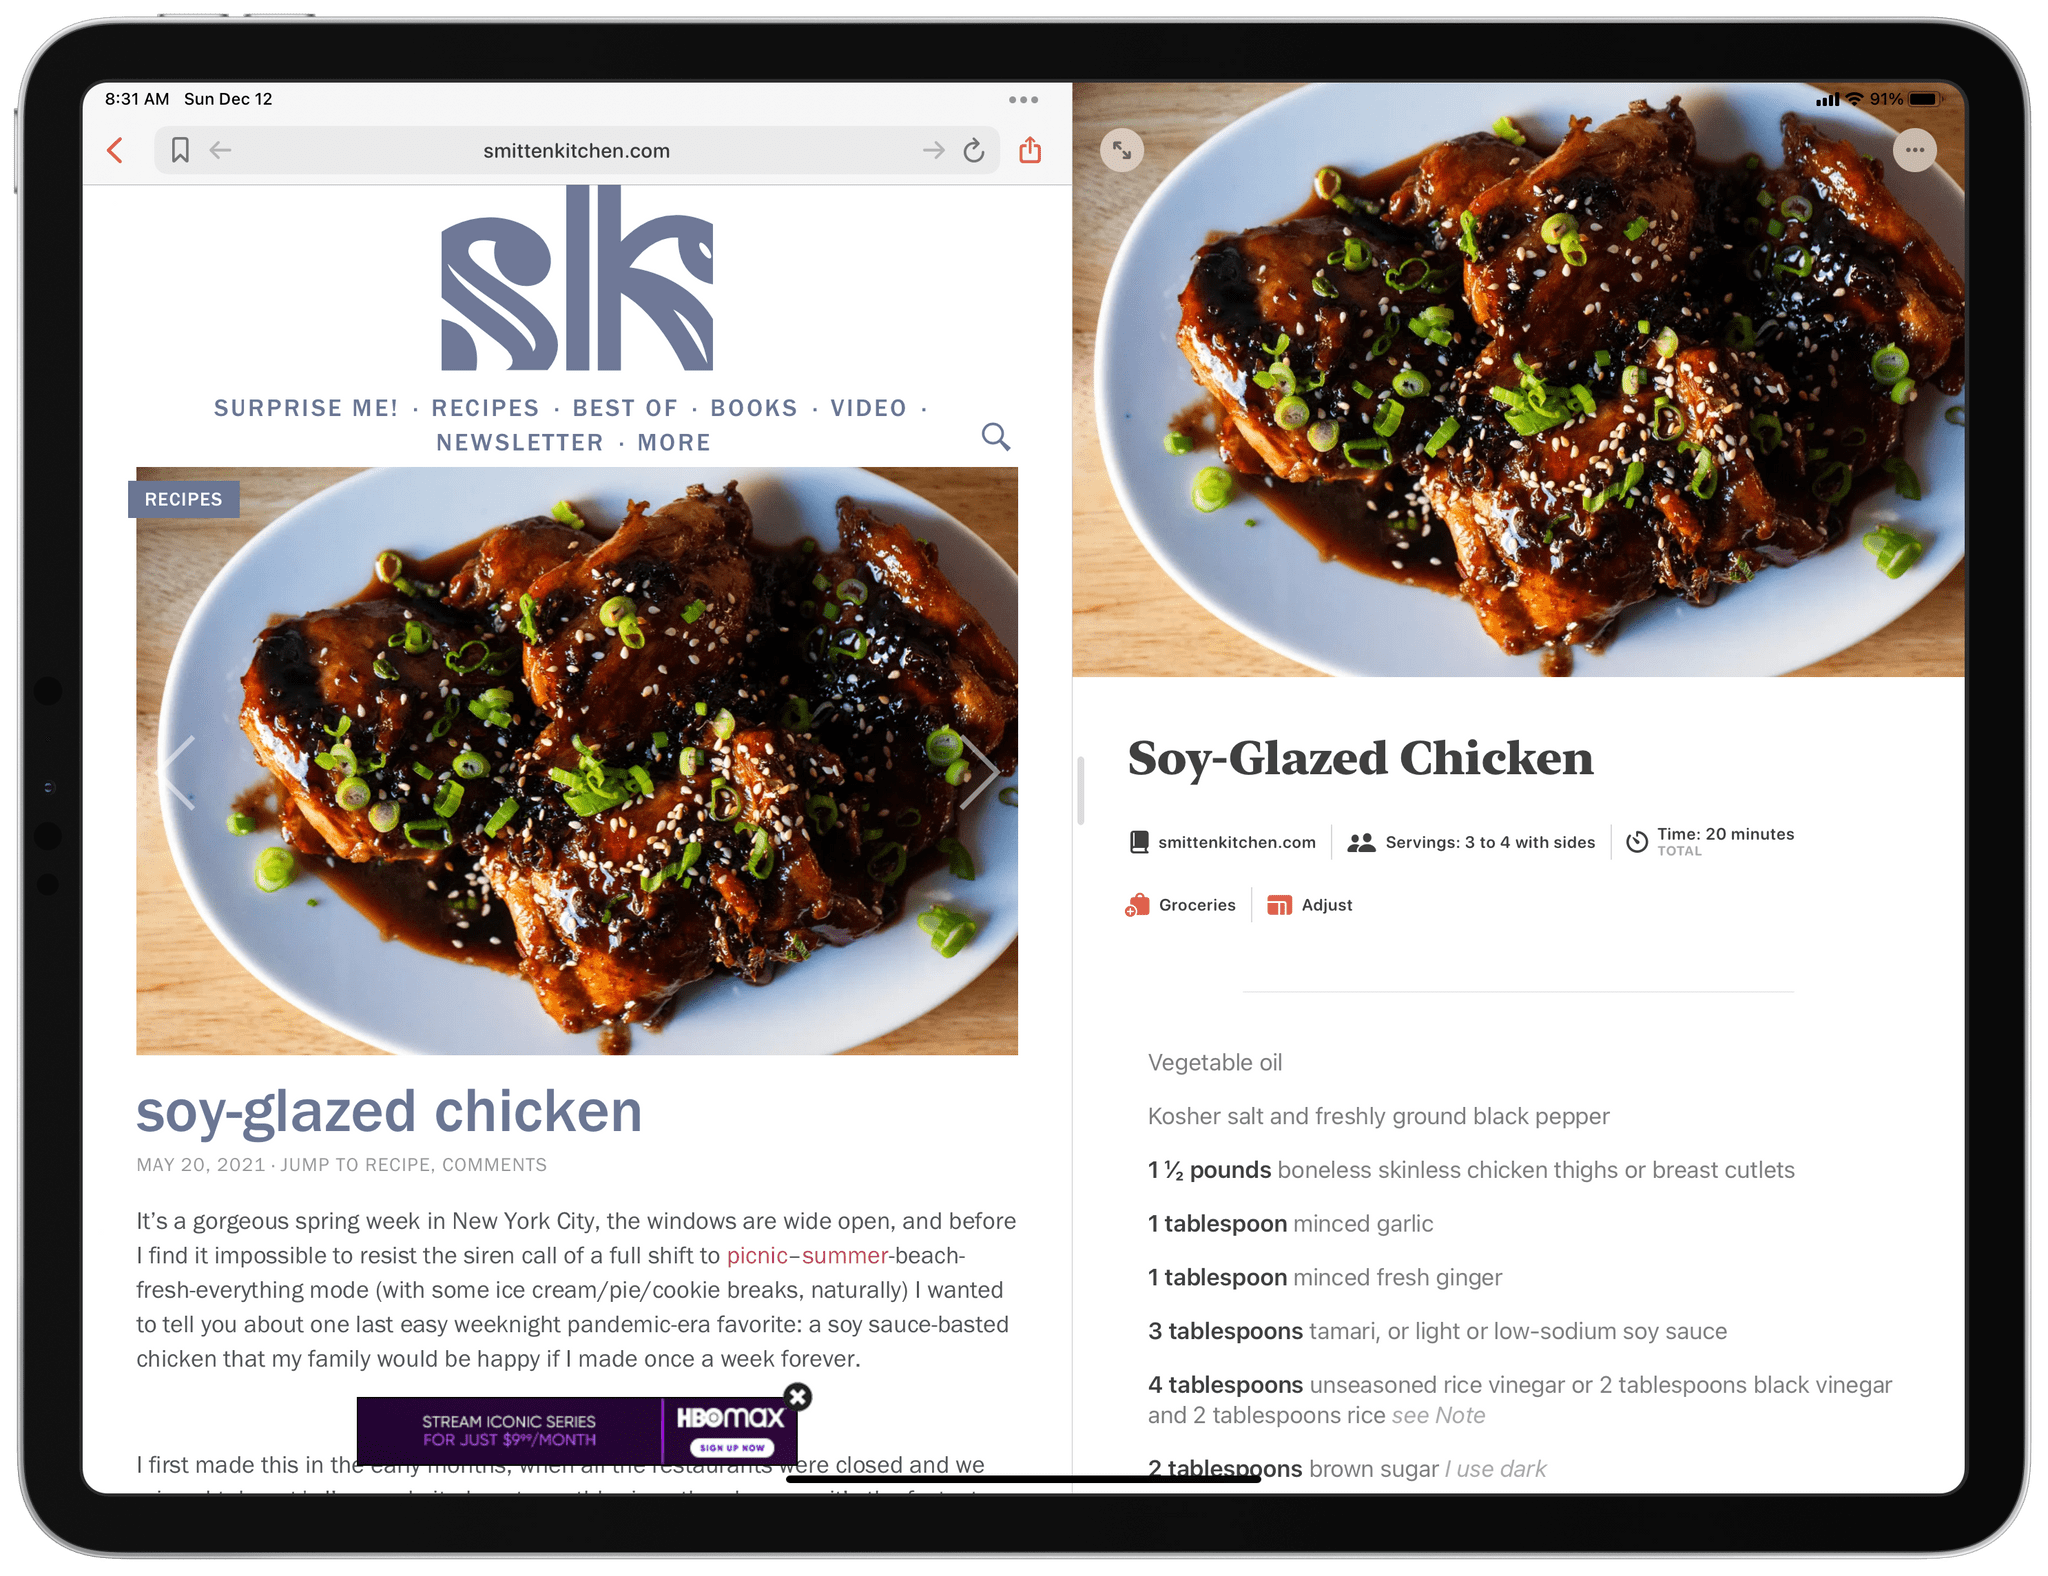 Adding recipes from Mela's built-in browser.